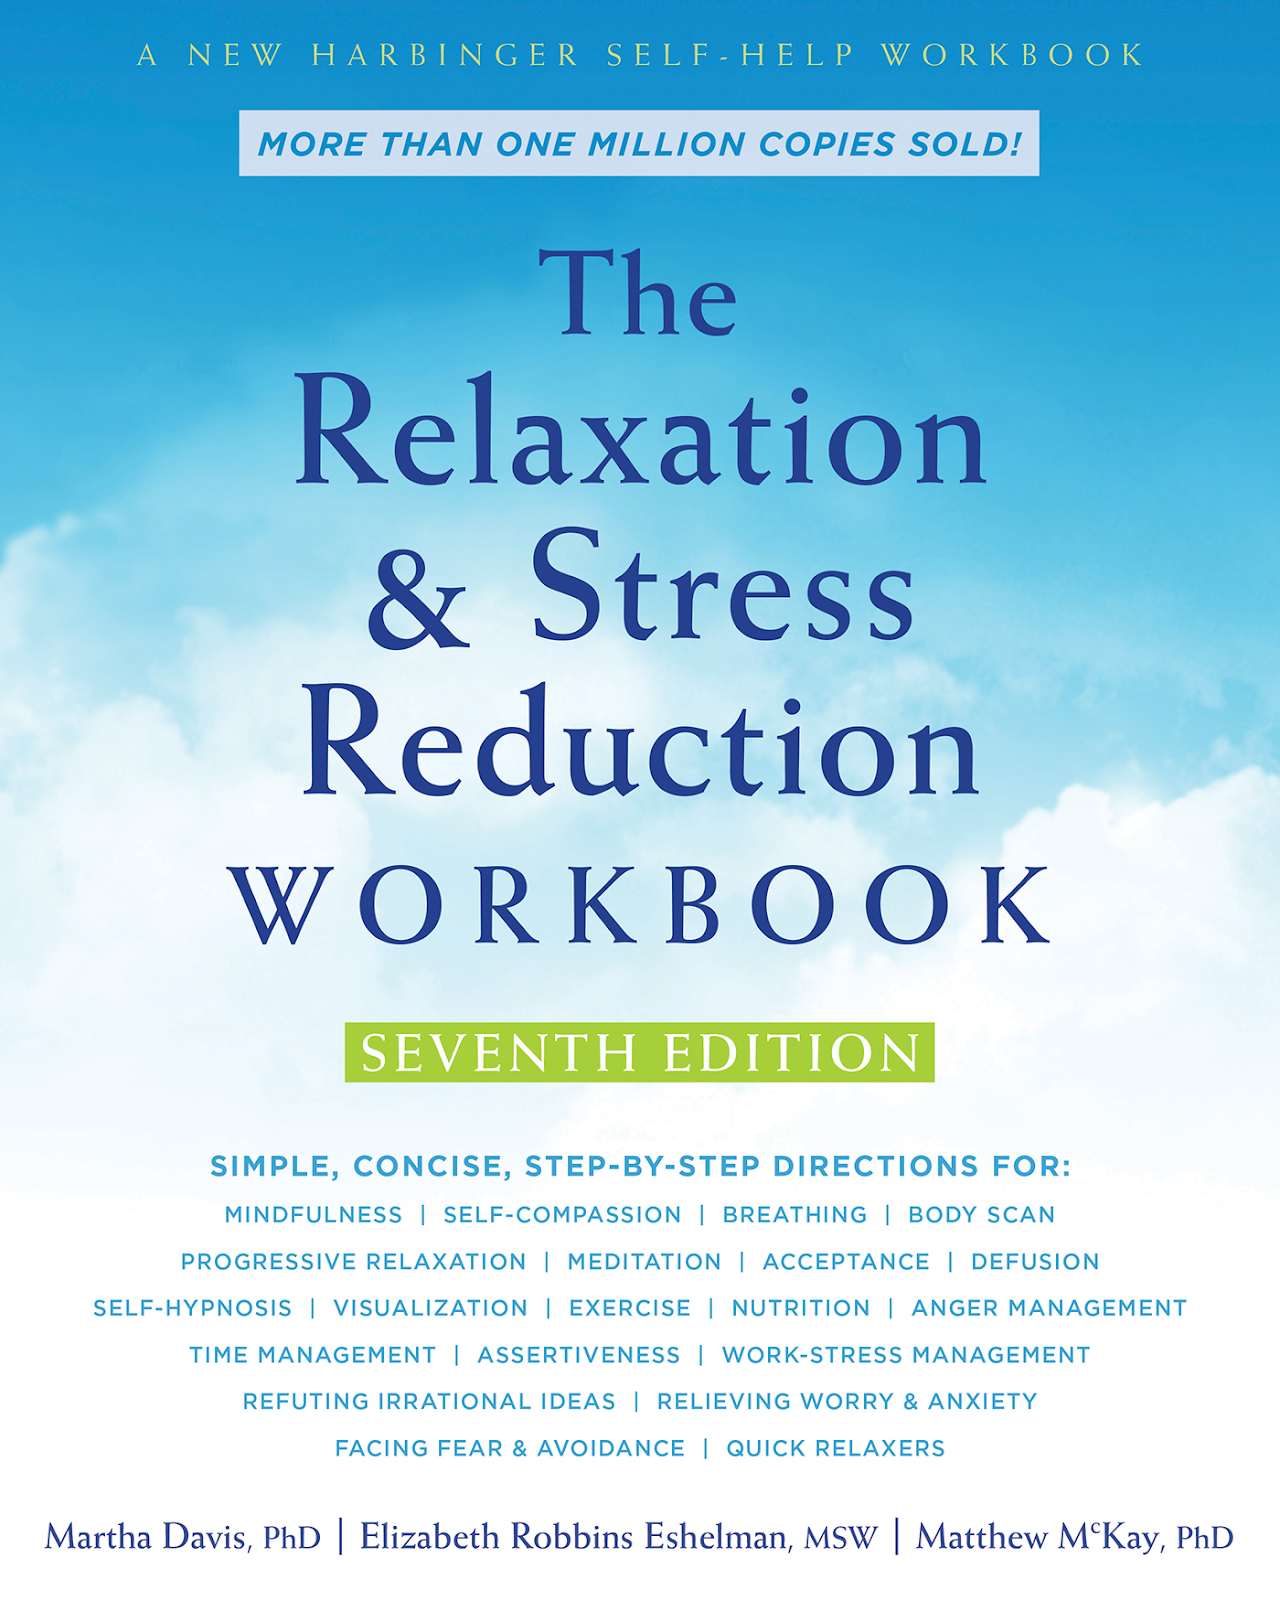 Books about Caregiving - The Relaxation and Stress Reduction Workbook